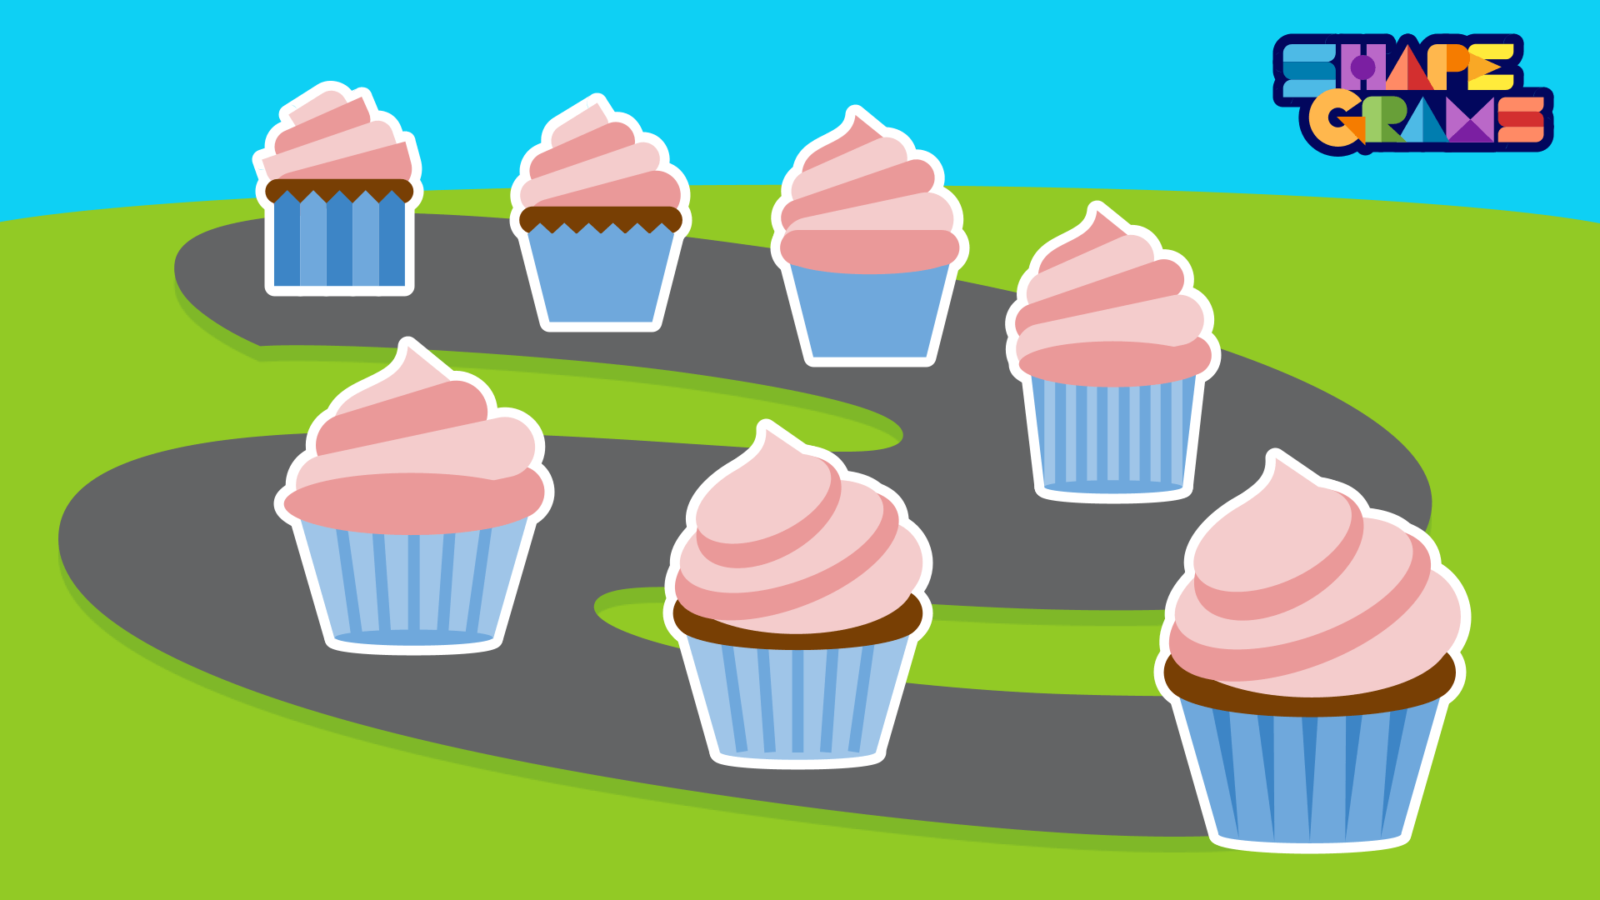 7 drawings of a cupcake on a path